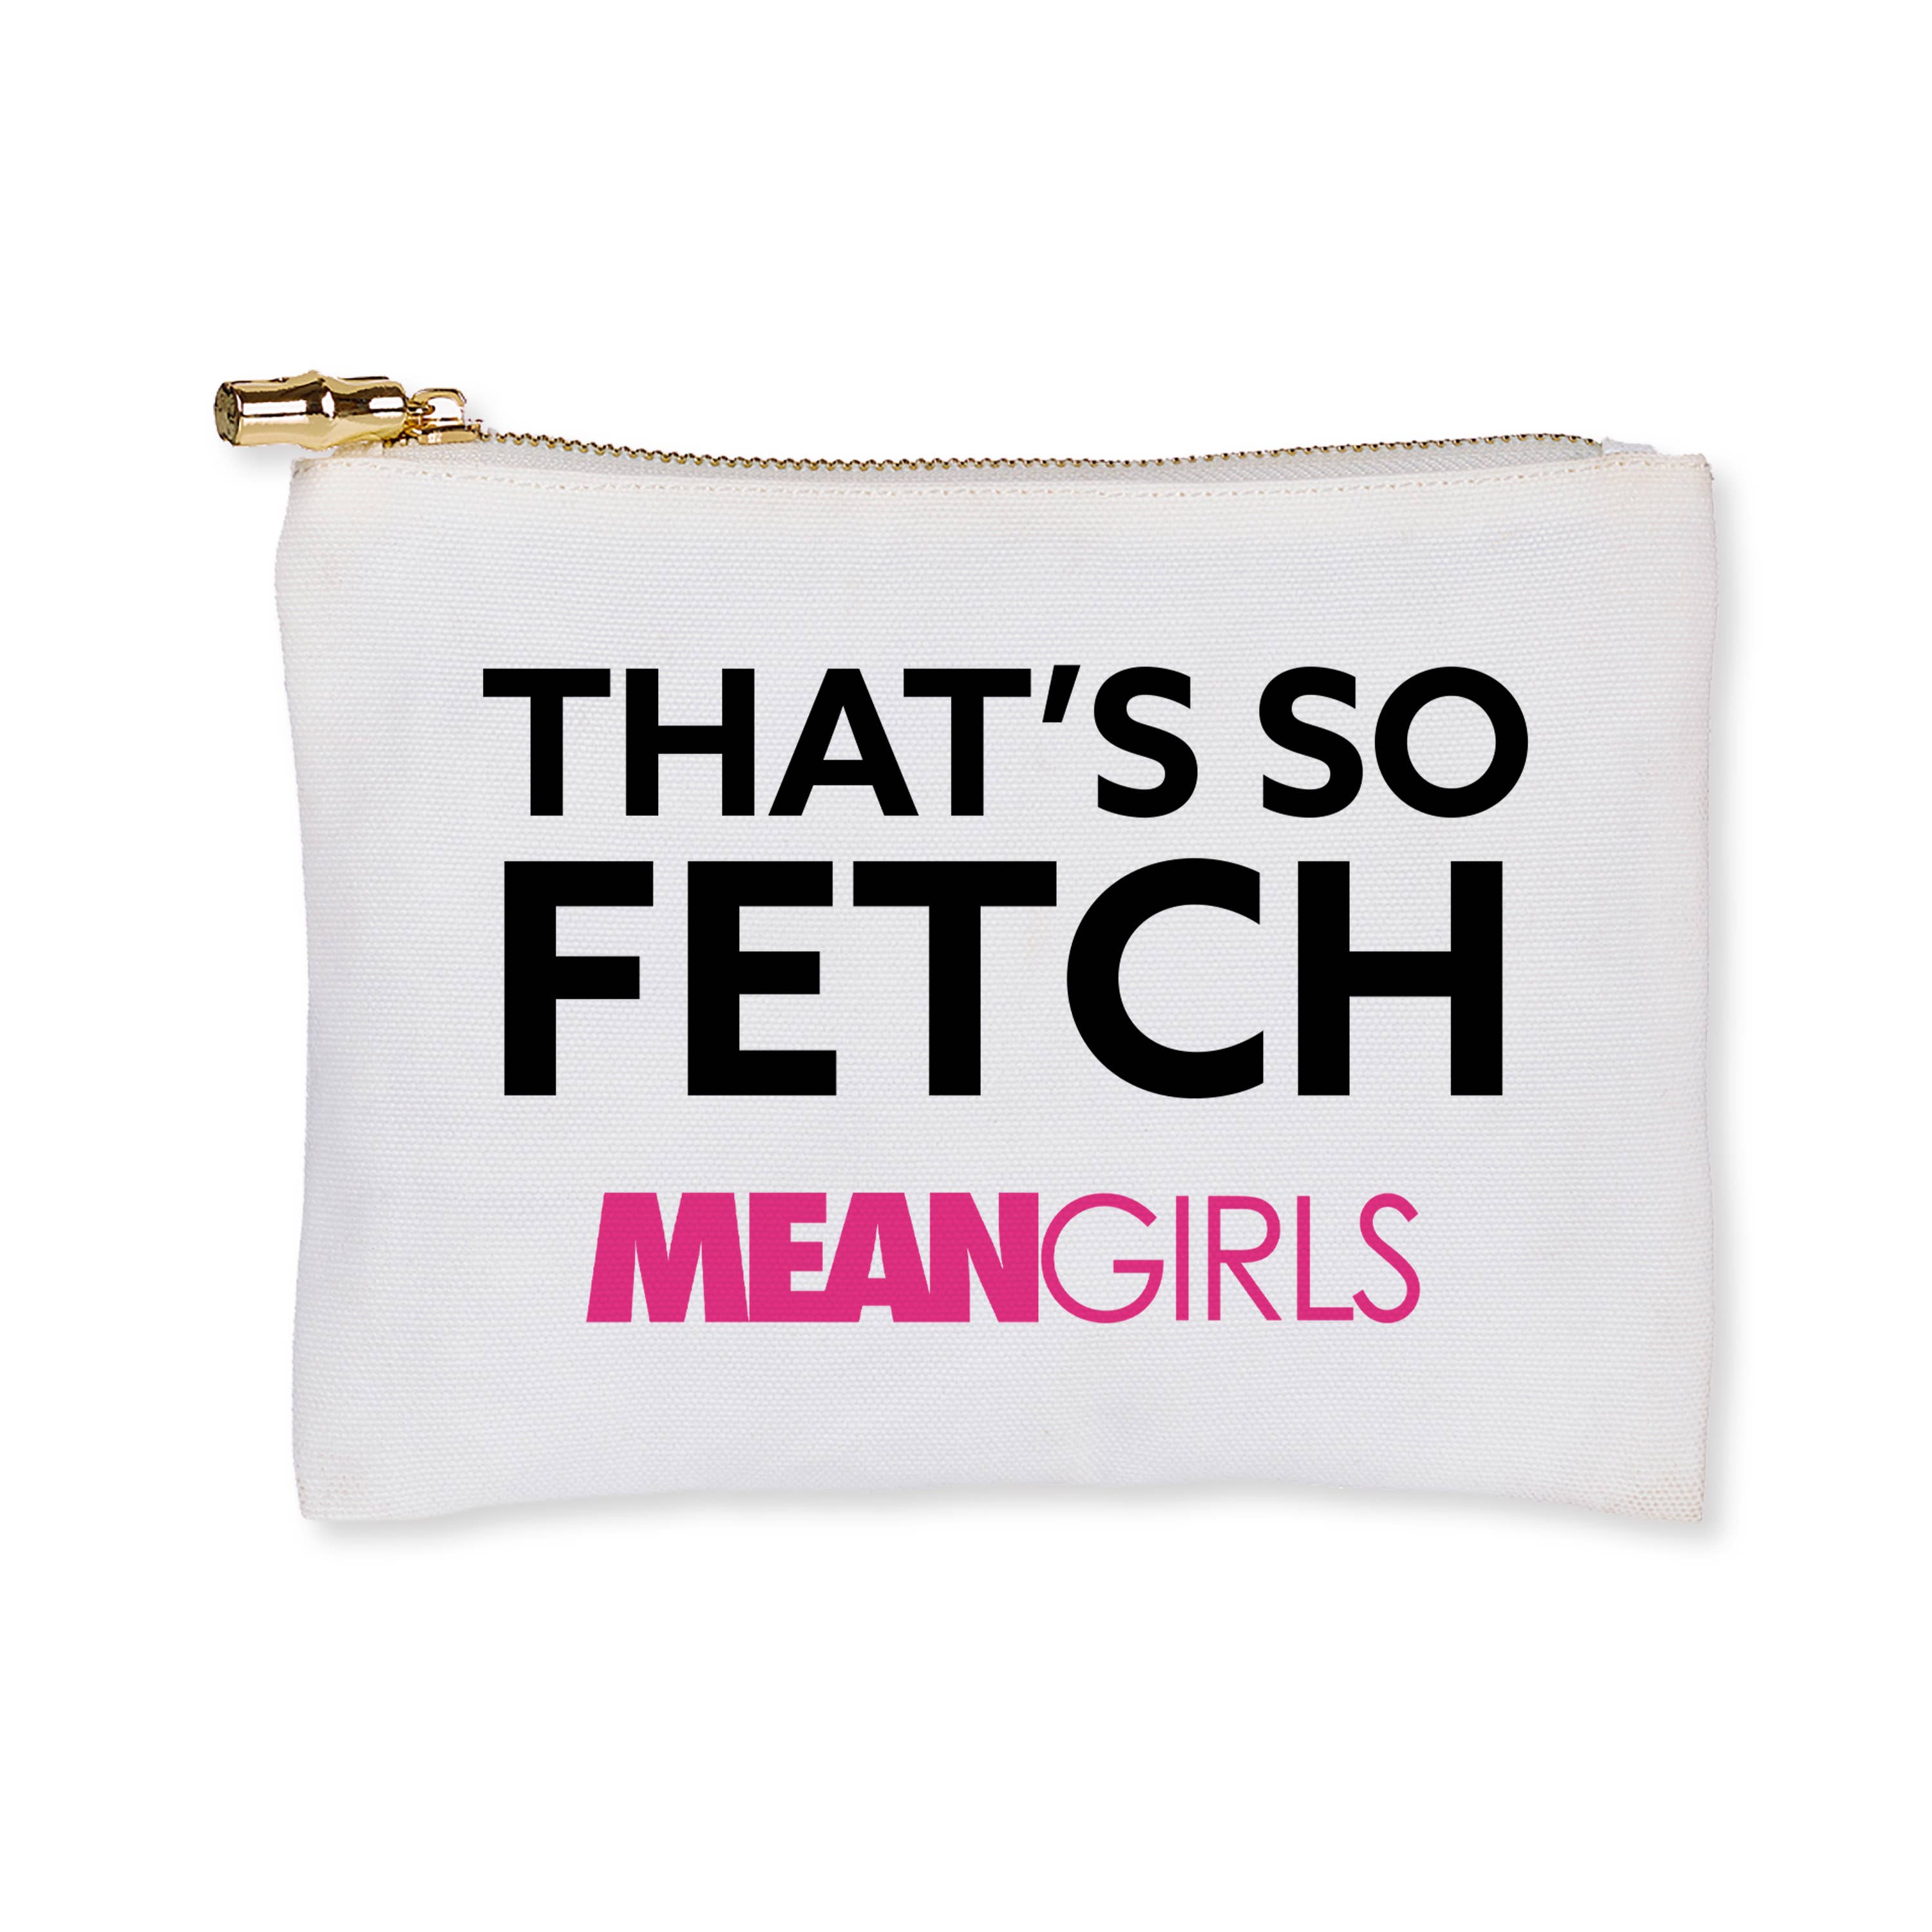 Mean Girls Coffee Creamer Is Coming to Stores and, Yes, It's So Fetch